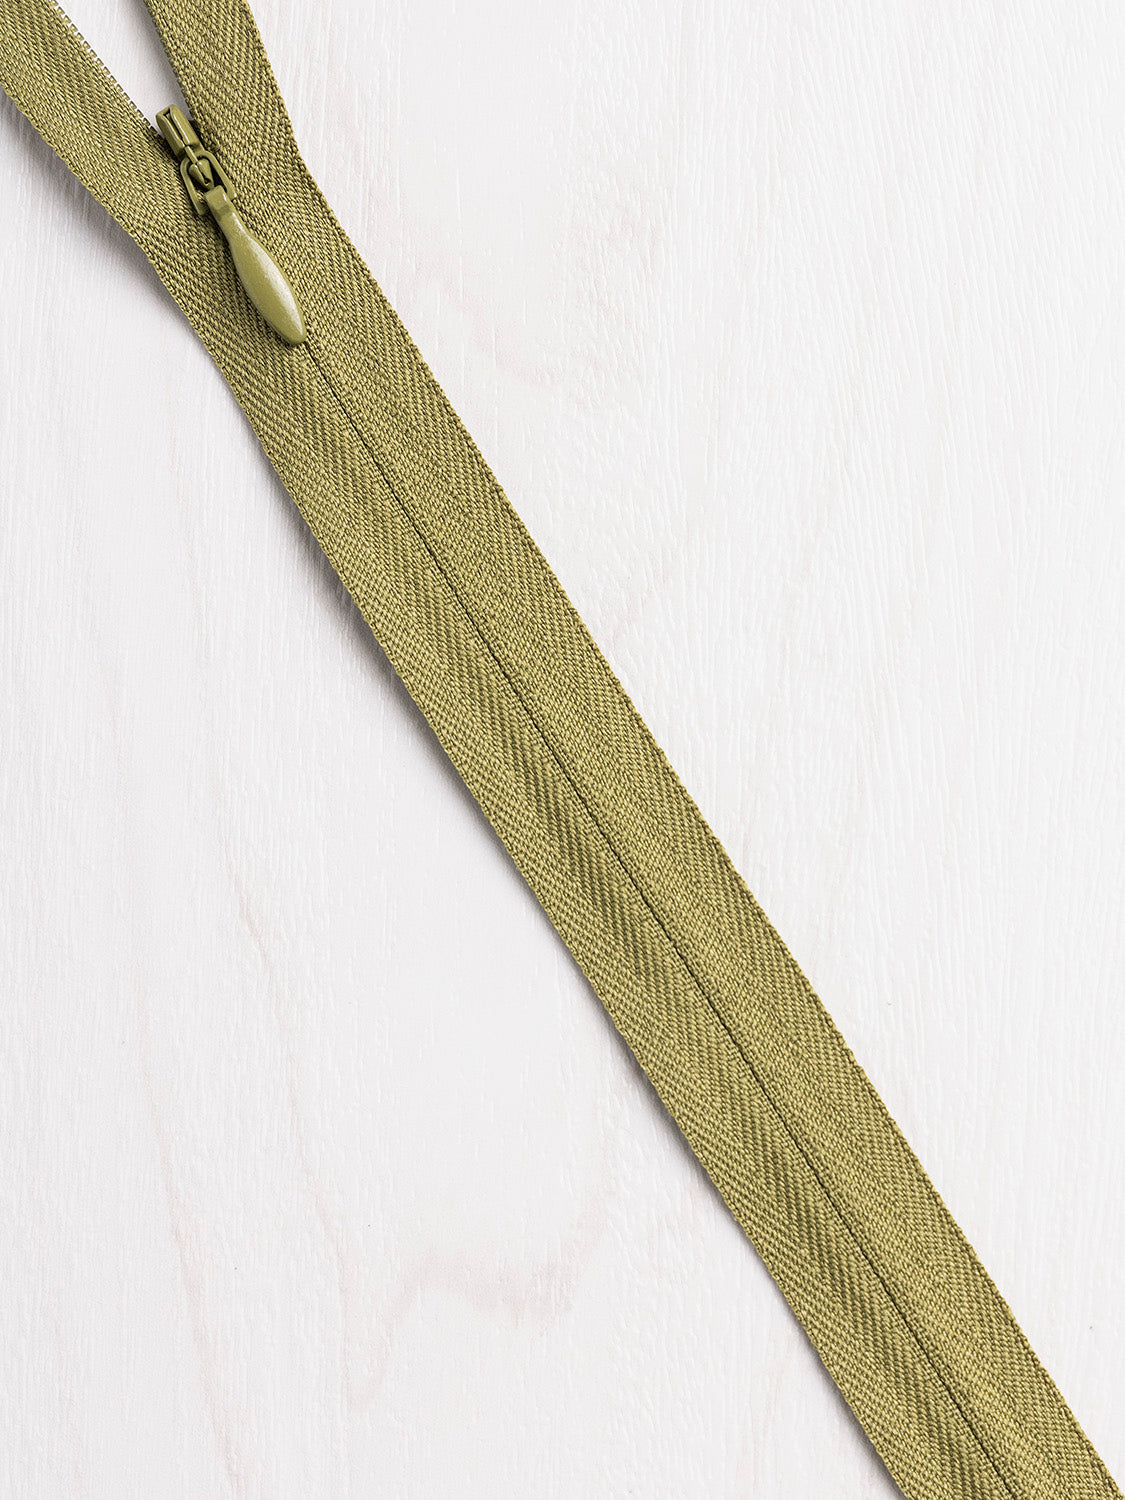 ANTIQUE BRASS READY-MADE YKK METAL ZIPPERS  Quality Thread – Quality  Thread & Notions